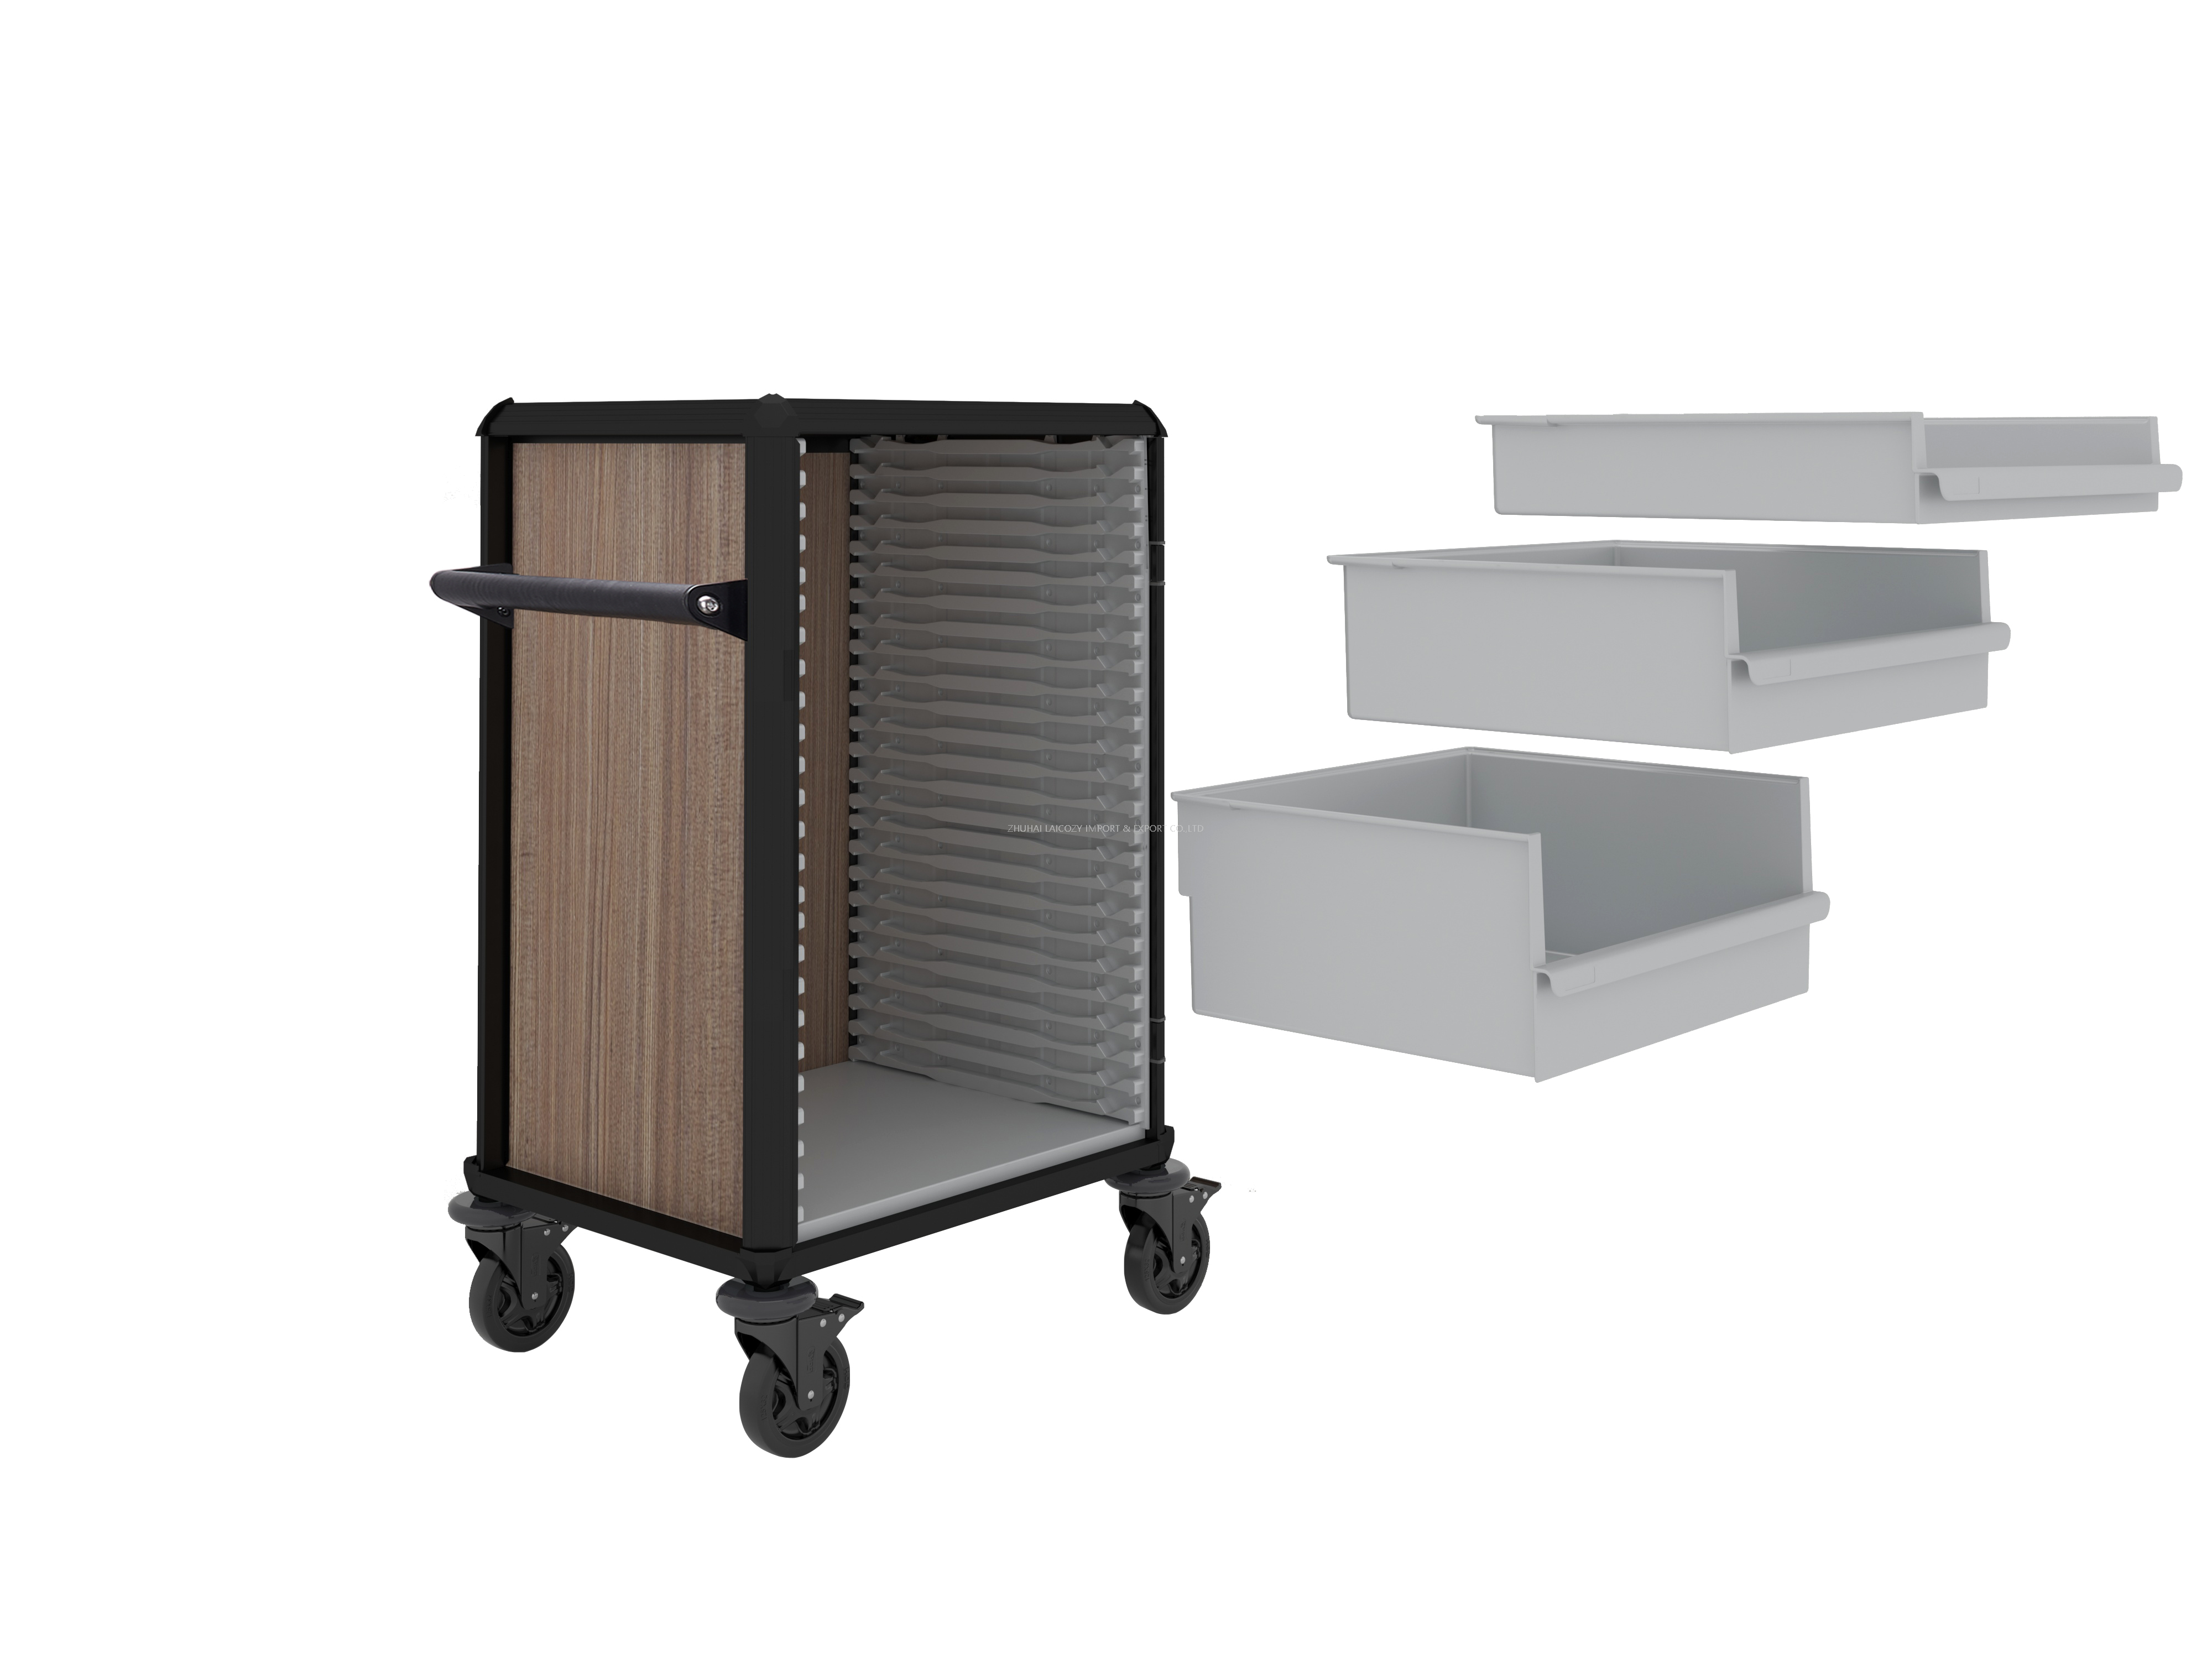 Star Hotel Aluminium Housekeeping Maid Cart Multi-function Trolley with Removable Drawers